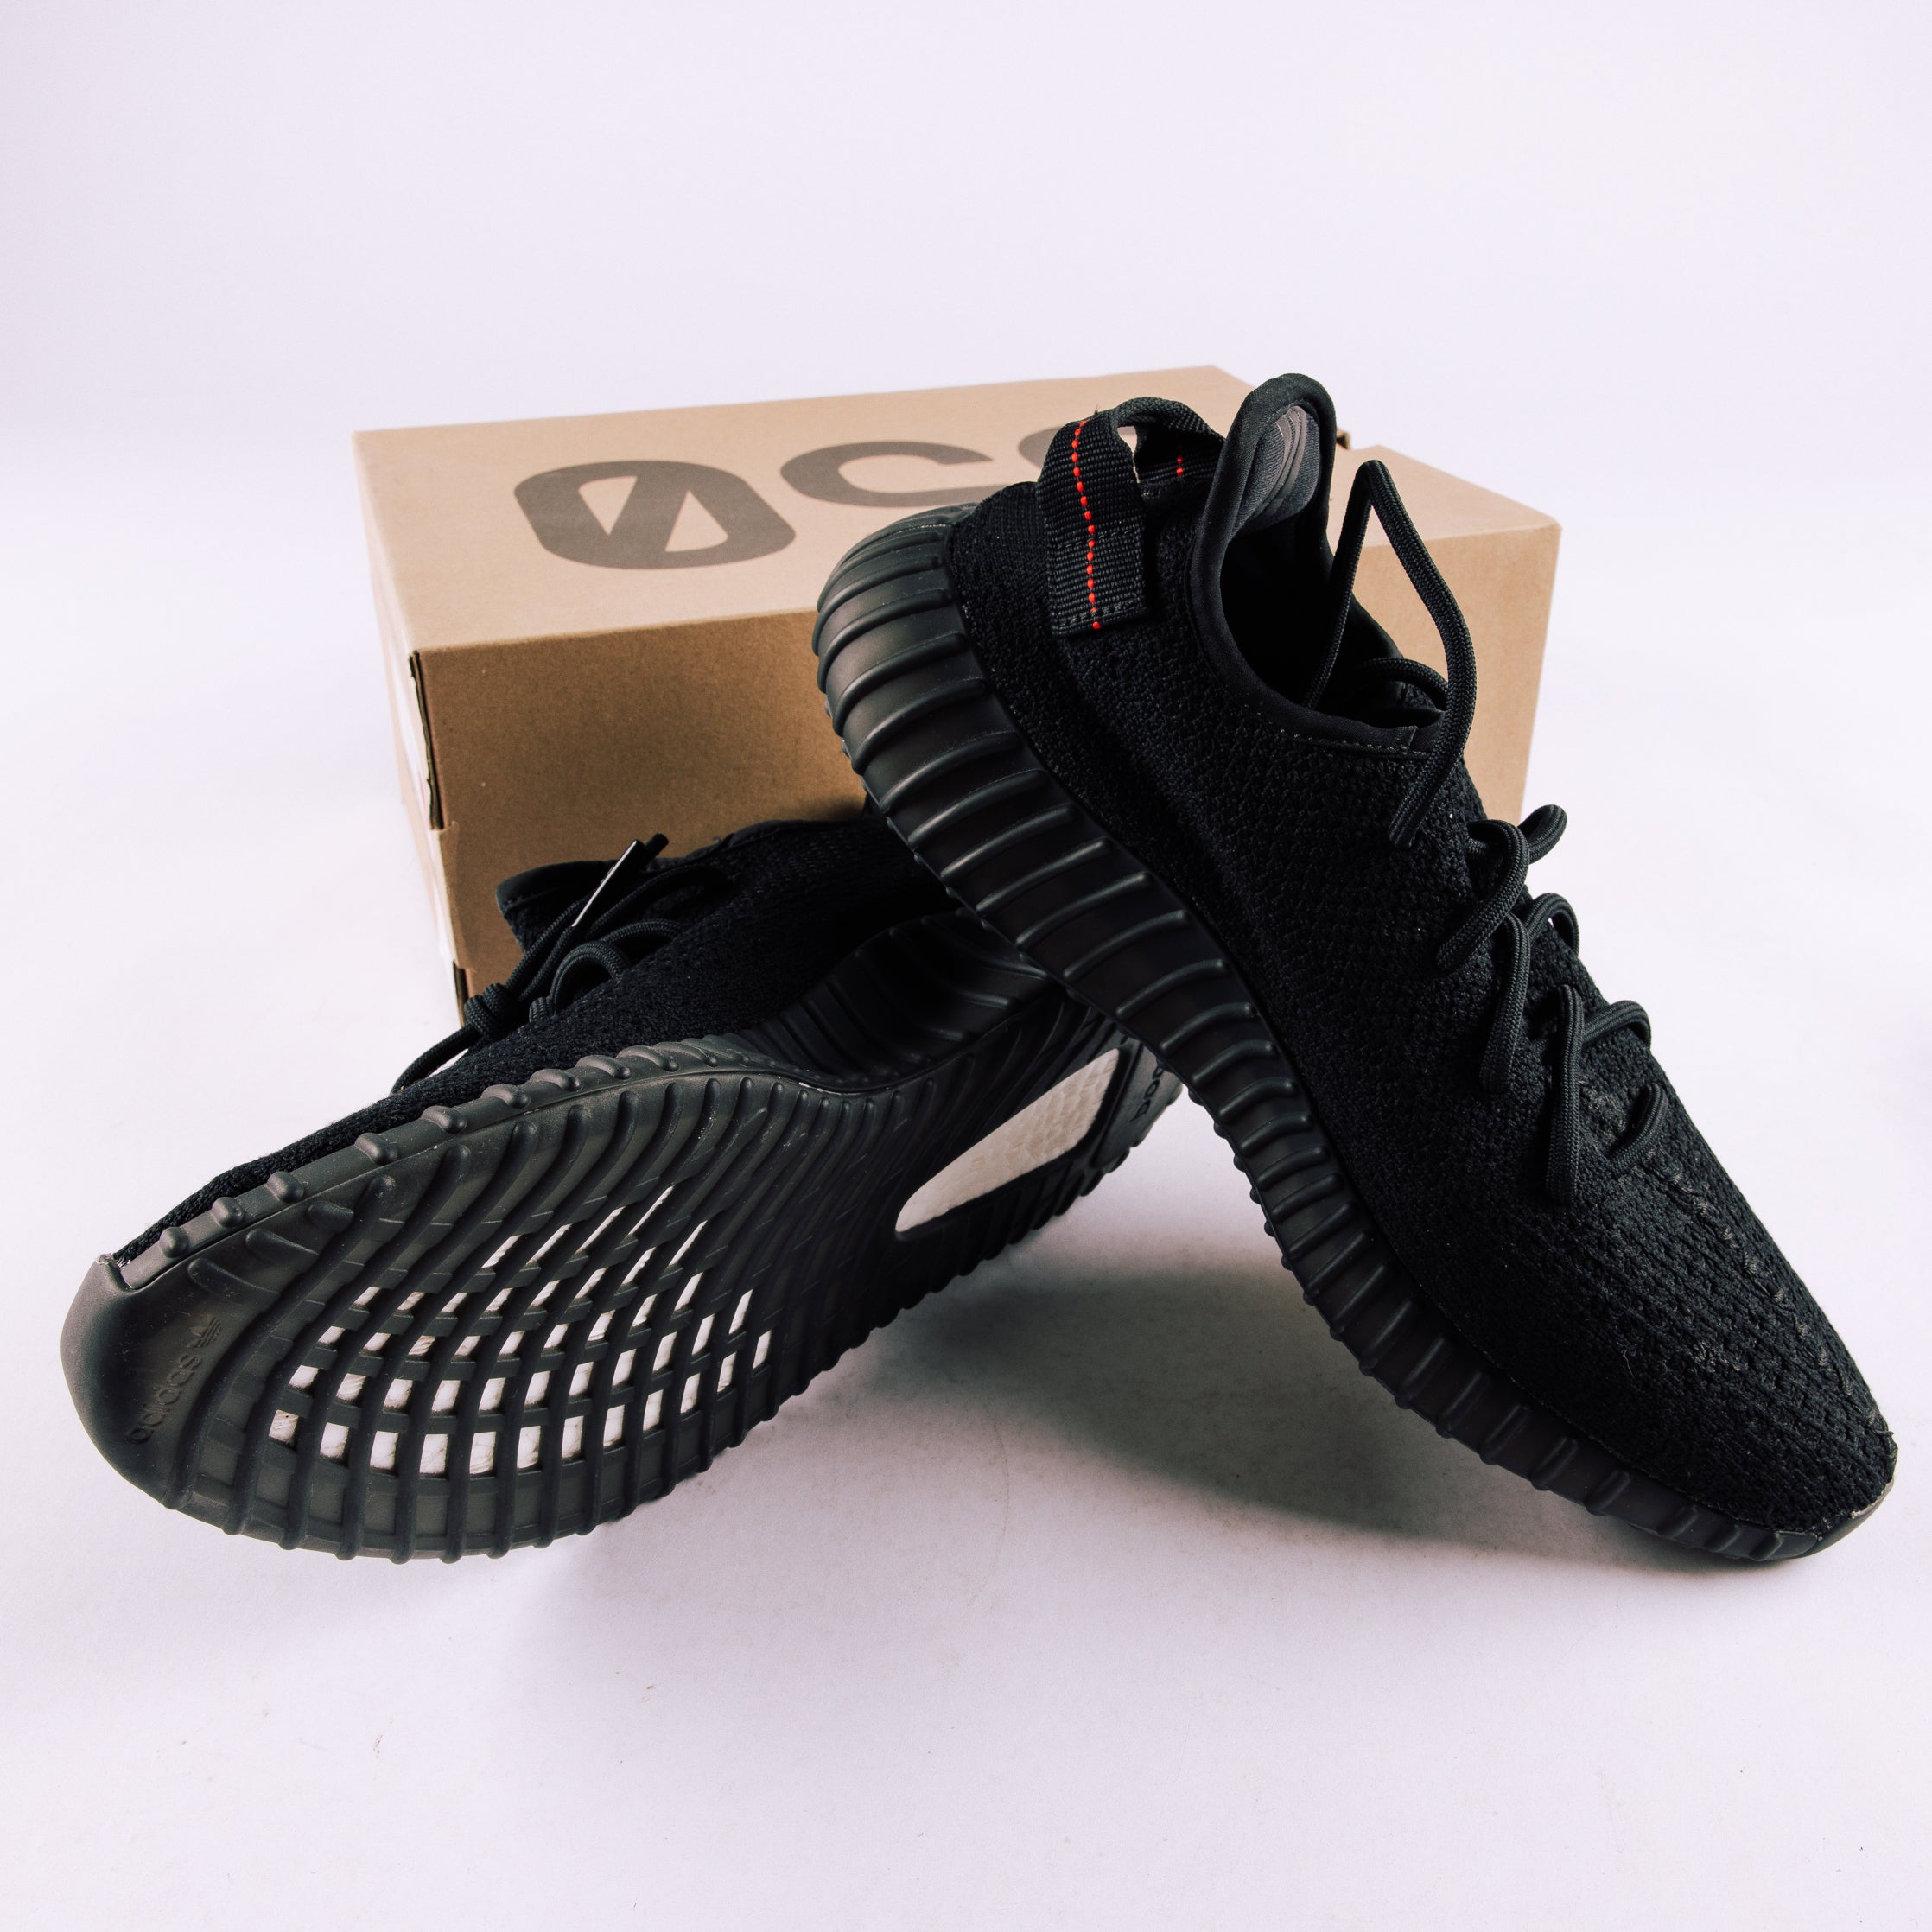 Adidas Yeezy Boost 350 V2 Black Red (2017/2020) for Women